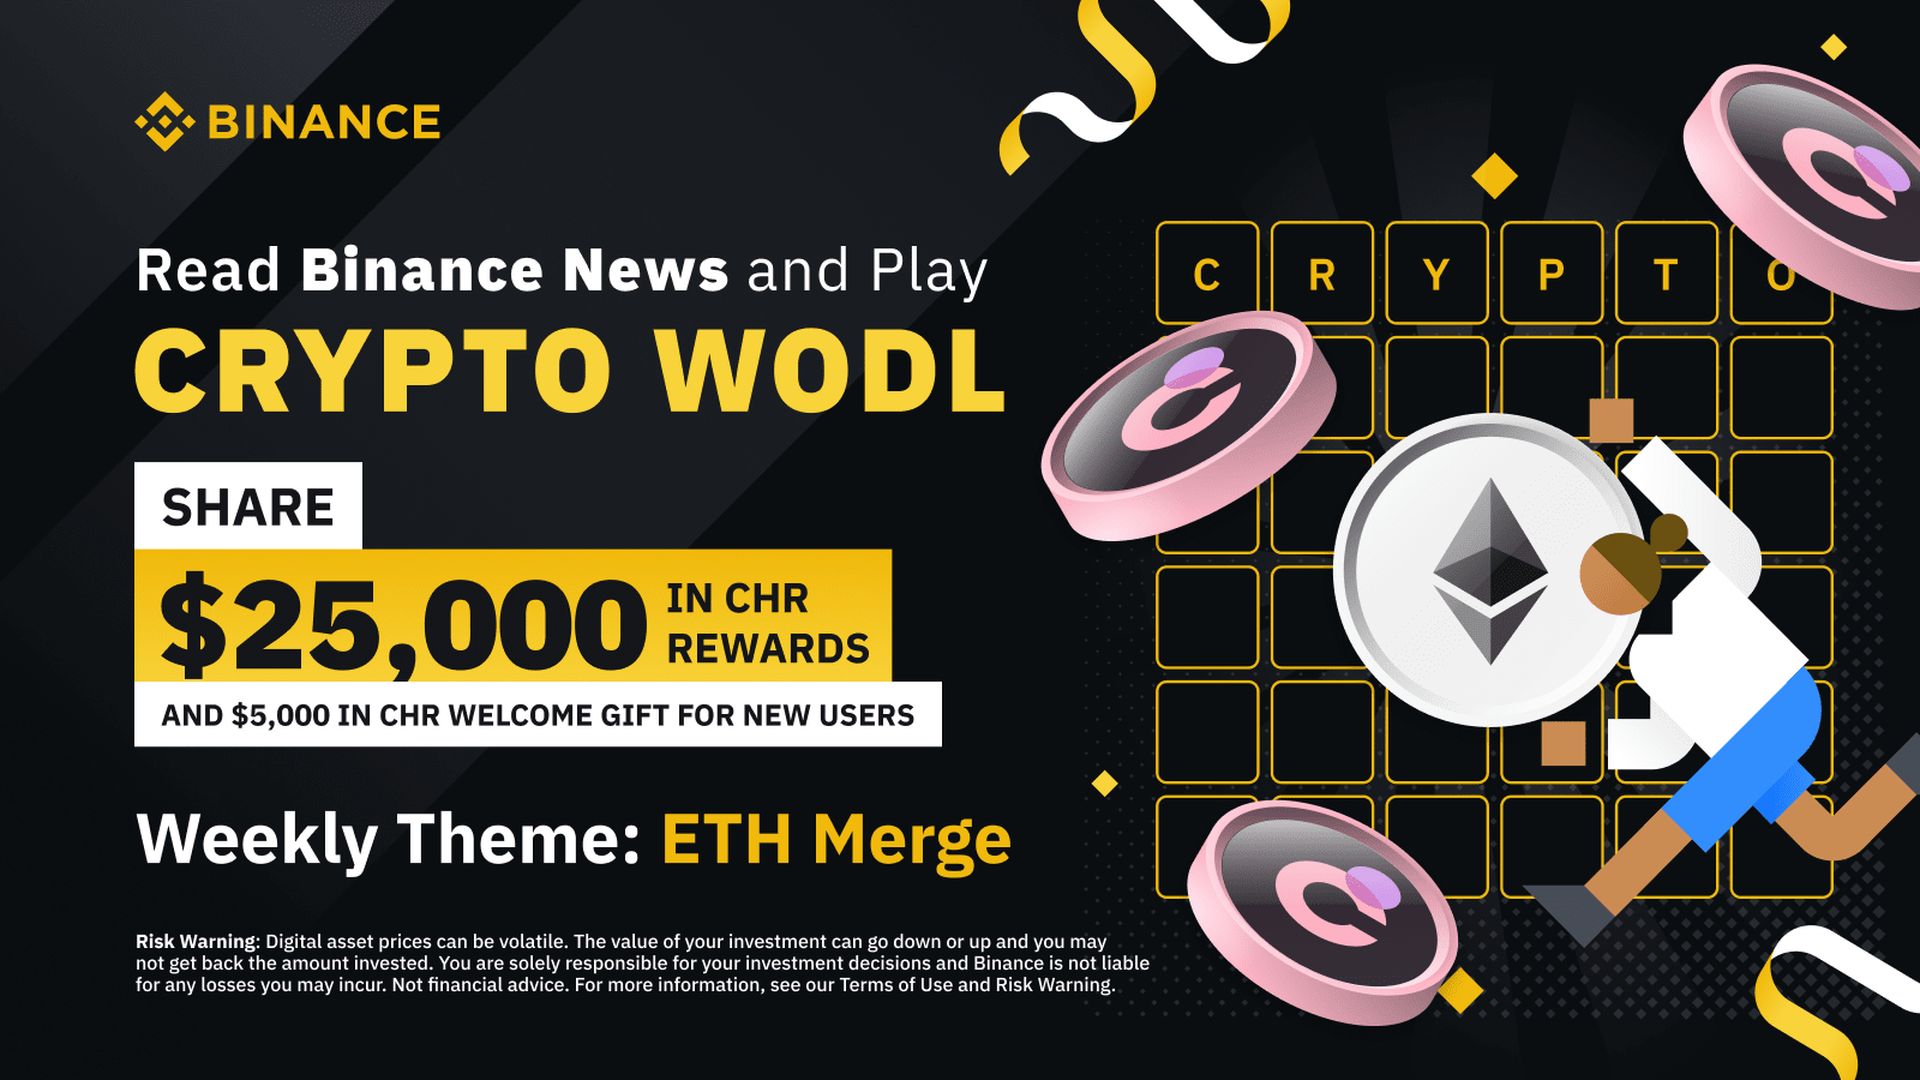 Today, we are here to show you the Binance Crypto WODL answers (September 26). If you find the correct cryptocurrency term in the Binance news, you might win...